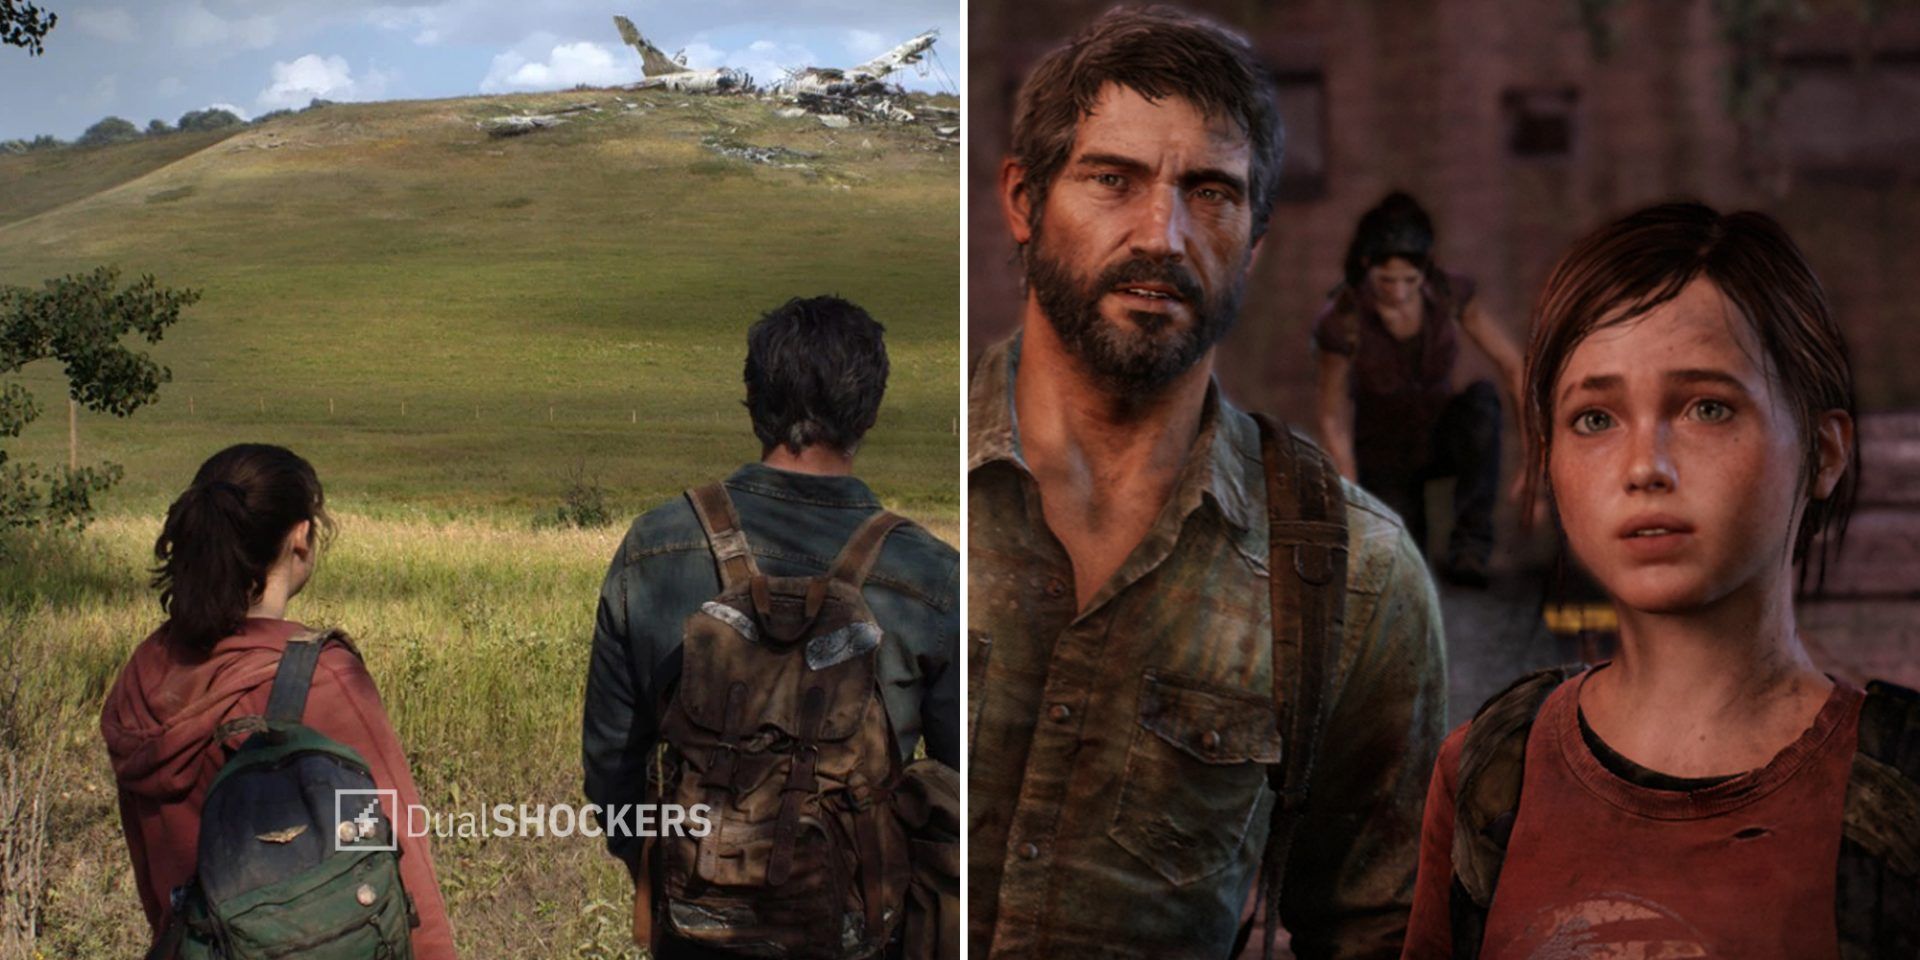 The Last of Us Ellie played by Bella Ramsey and Joel played by Pedro Pascal on left, Joel and Ellie from the Last of Us video game on right